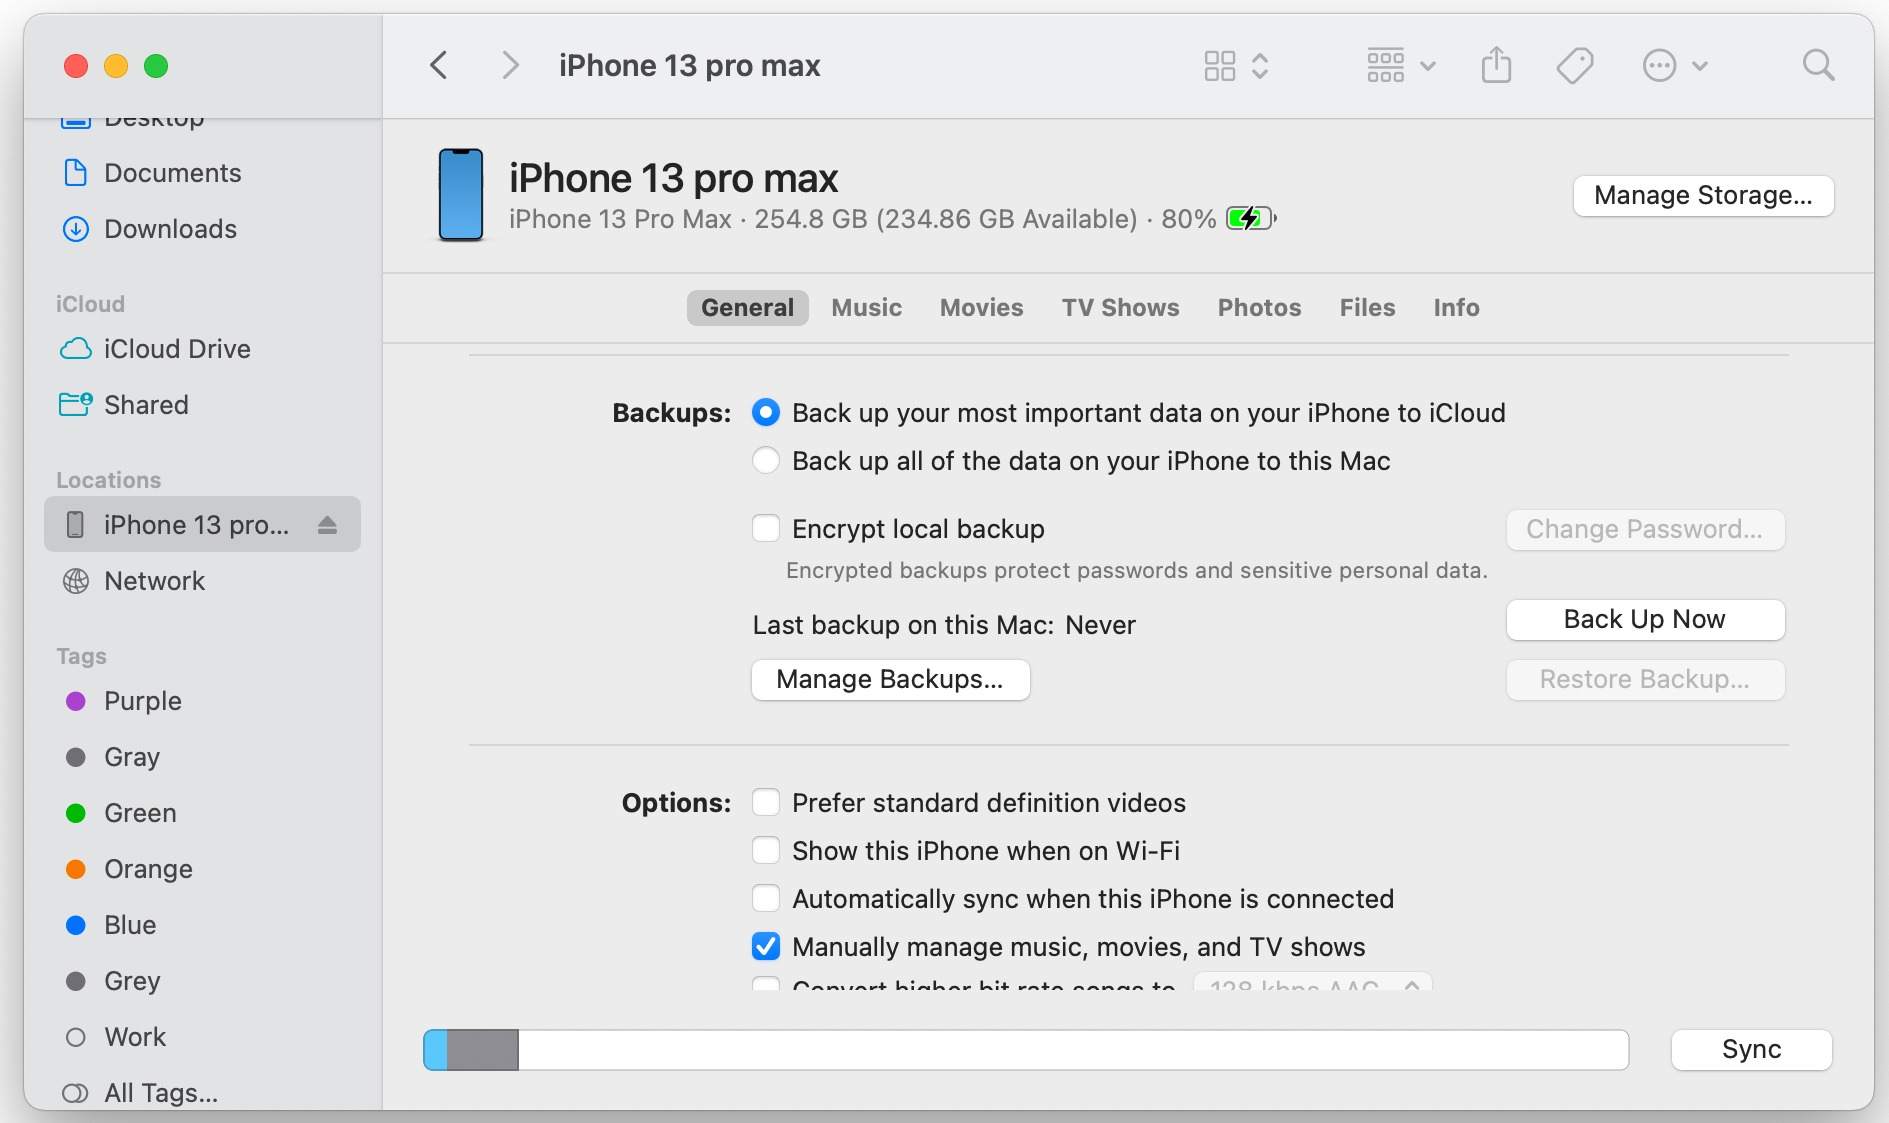 Restore deleted text messages using Finders or iTunes